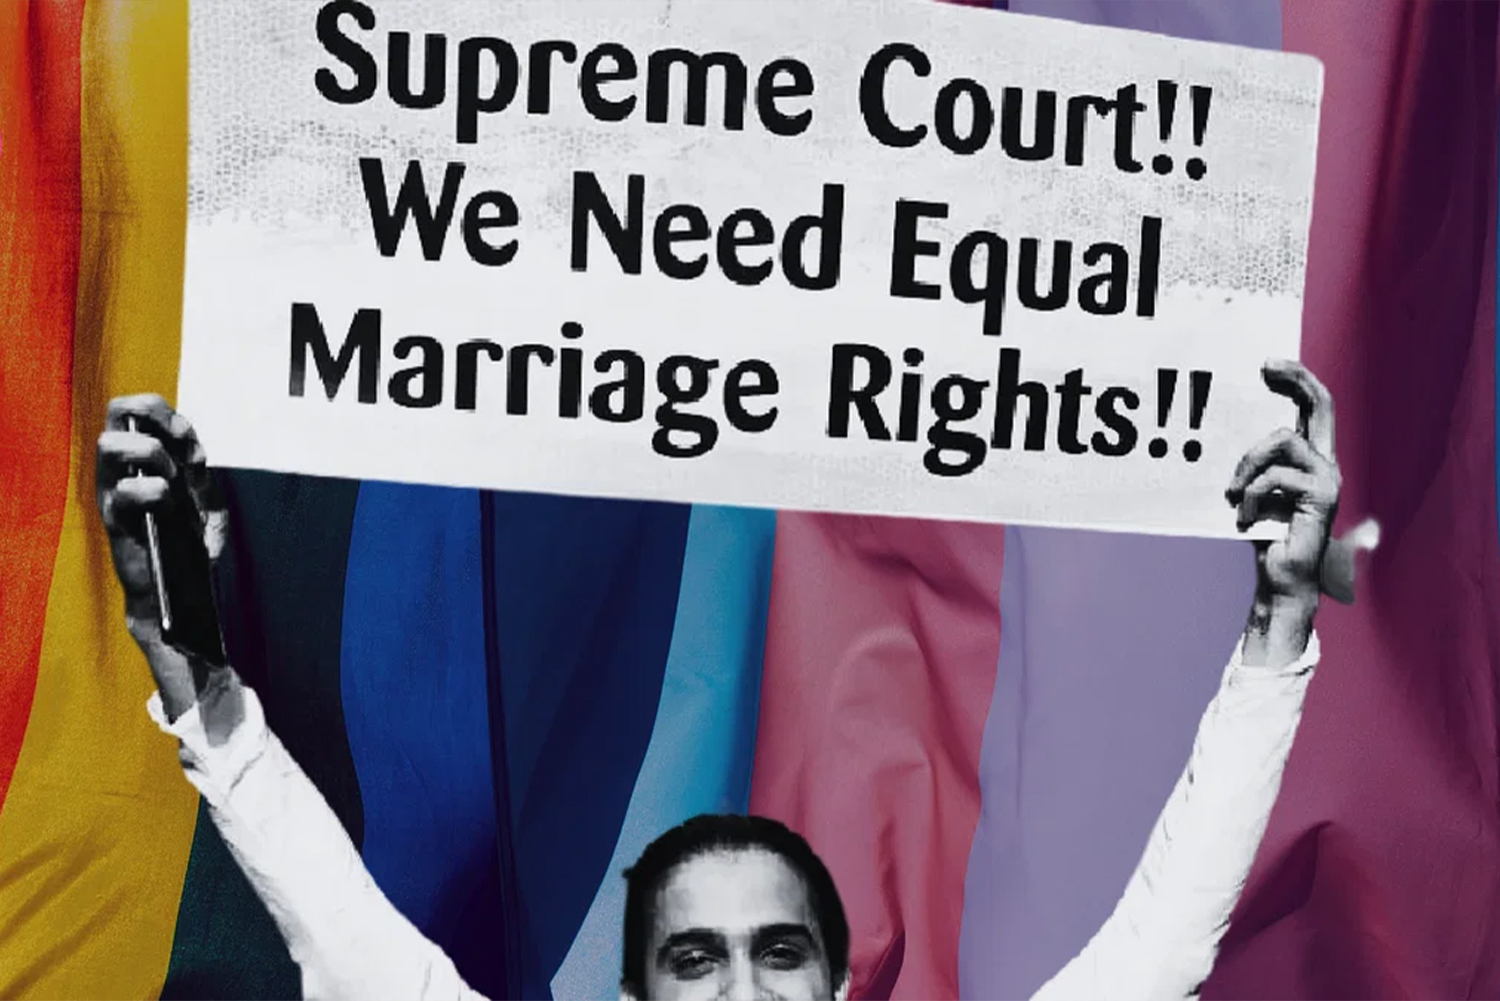 Supreme Court Hearing on Same-Sex Marriage